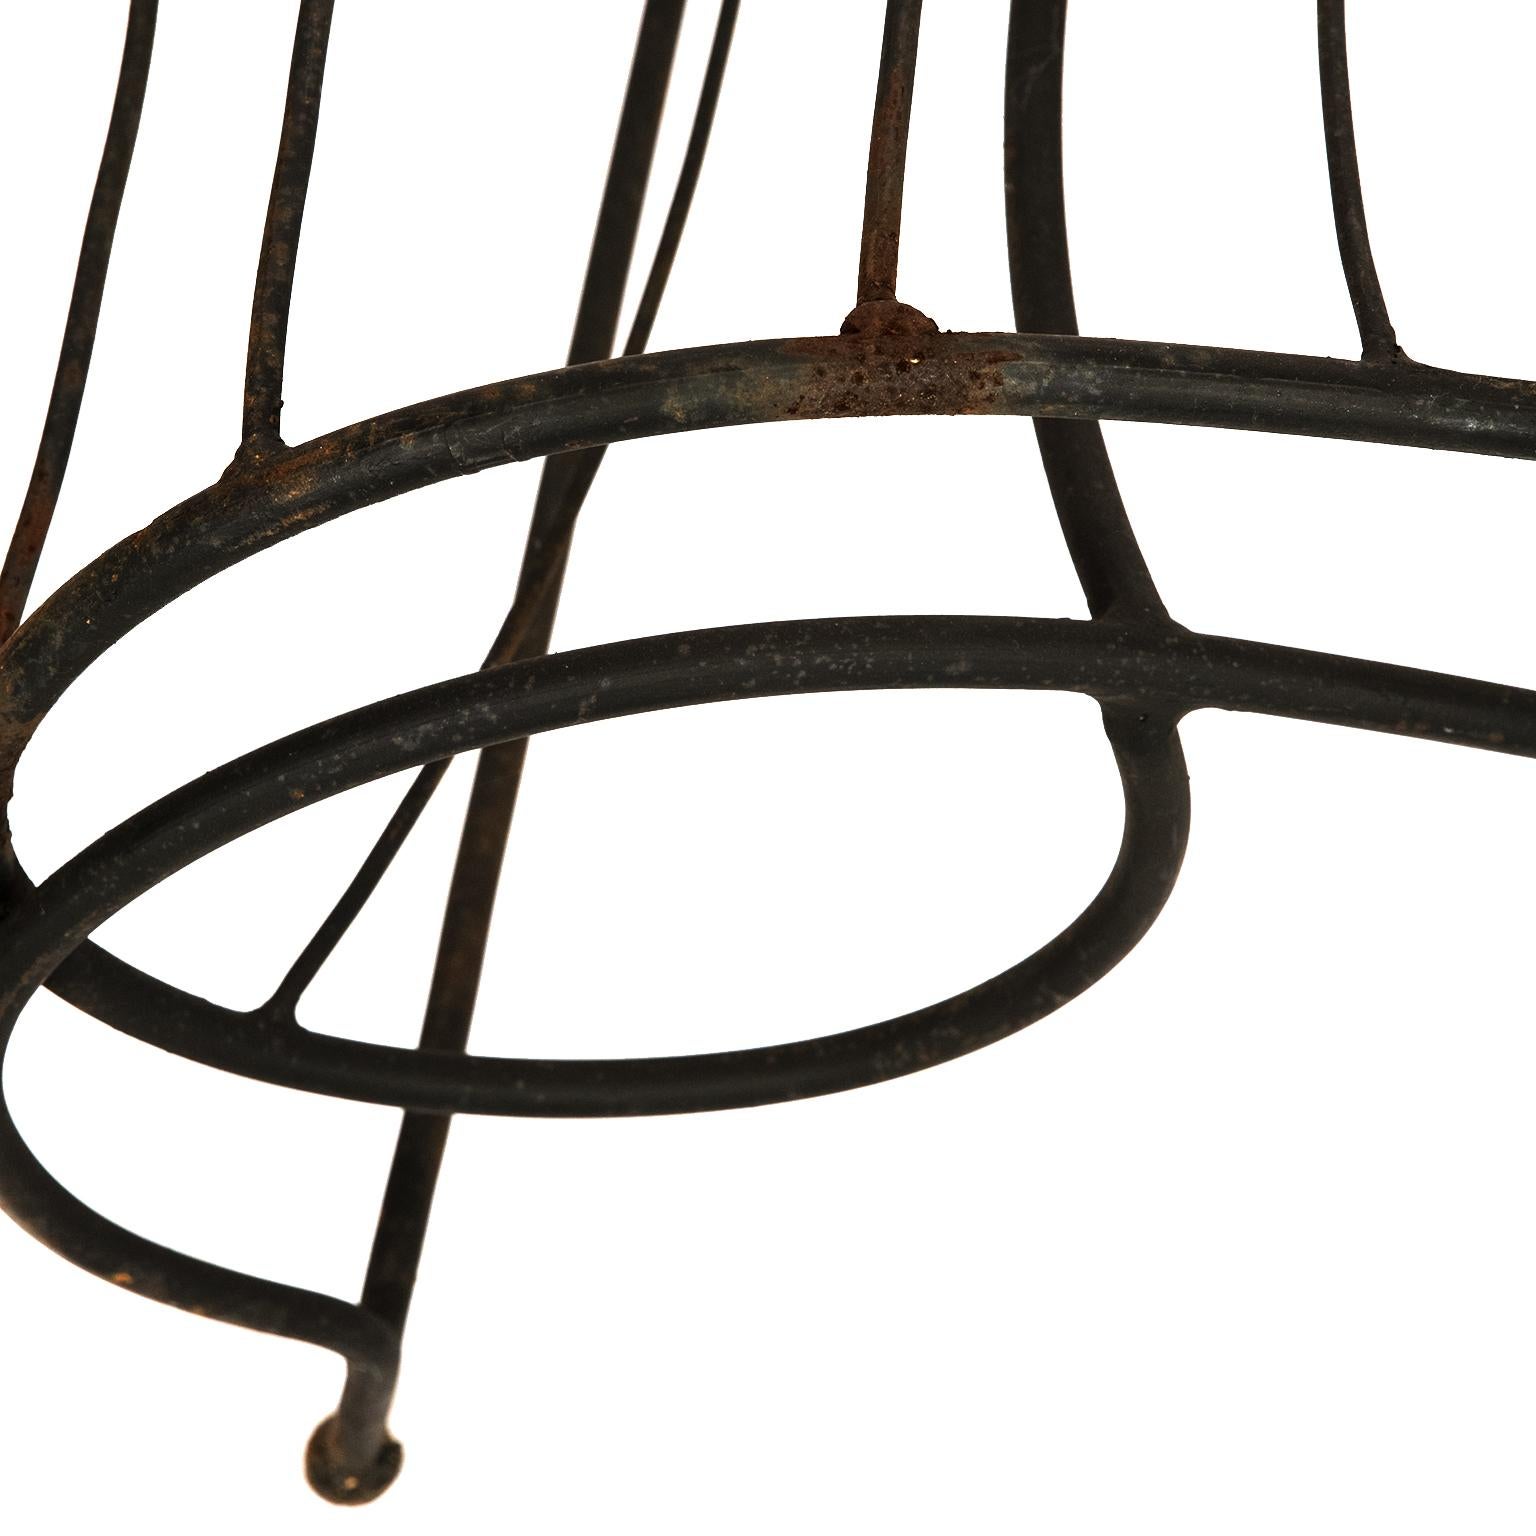  Andre Dubreuil Inspired Post Modern Chair in Wrought Iron In Good Condition For Sale In Toronto, ON